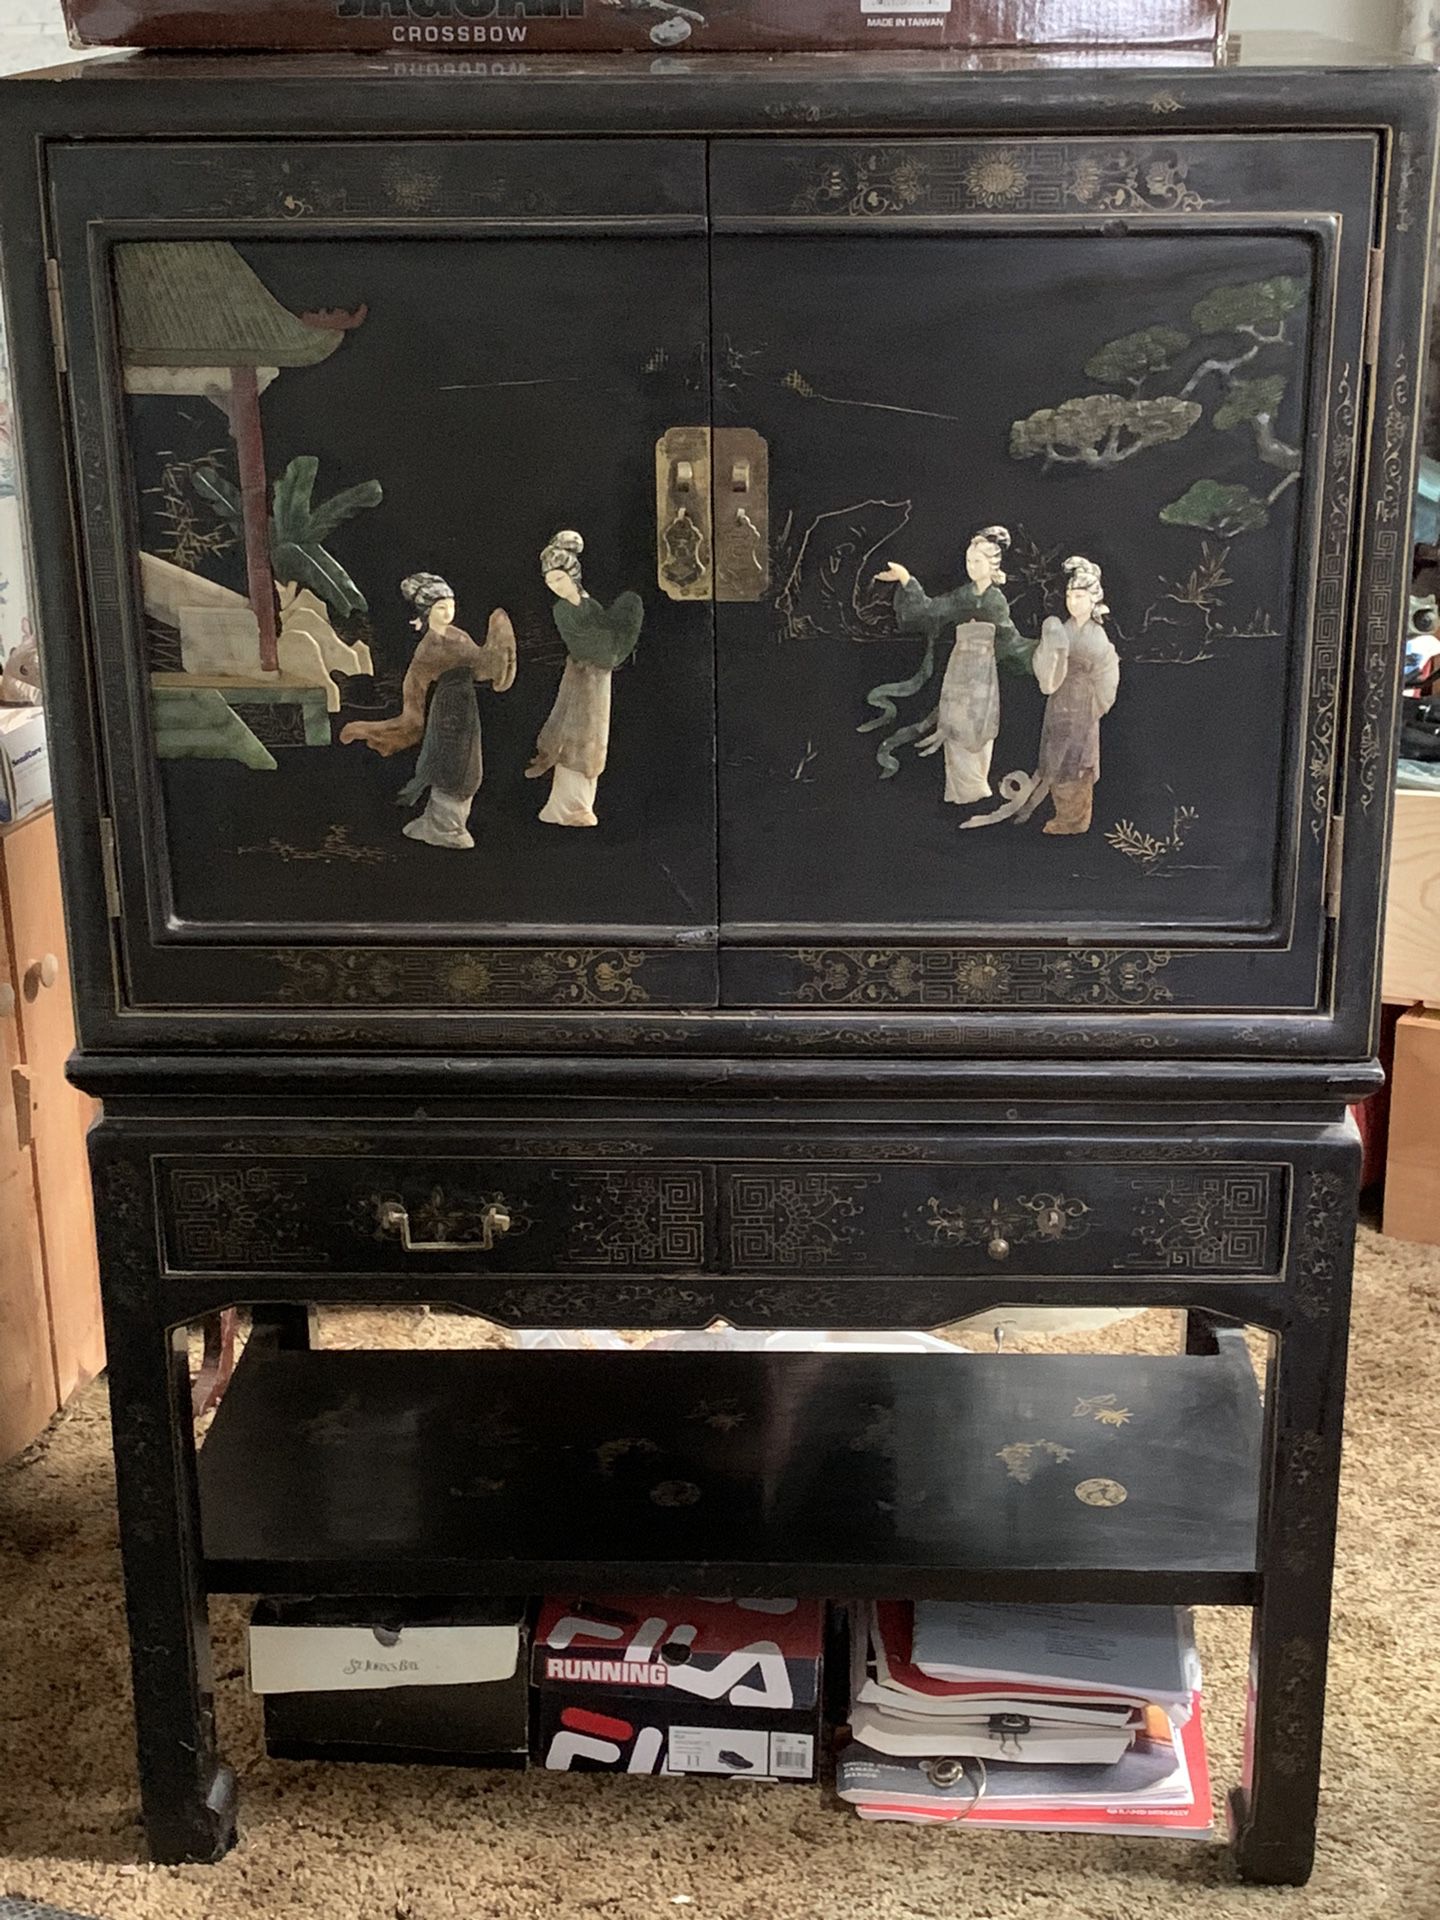 Weekend  Special  - Antique China Hutch With 2 Smaller Twin Hutches With Jade  & Mother of Pearl Figurines Mounted - Marked Way Down!